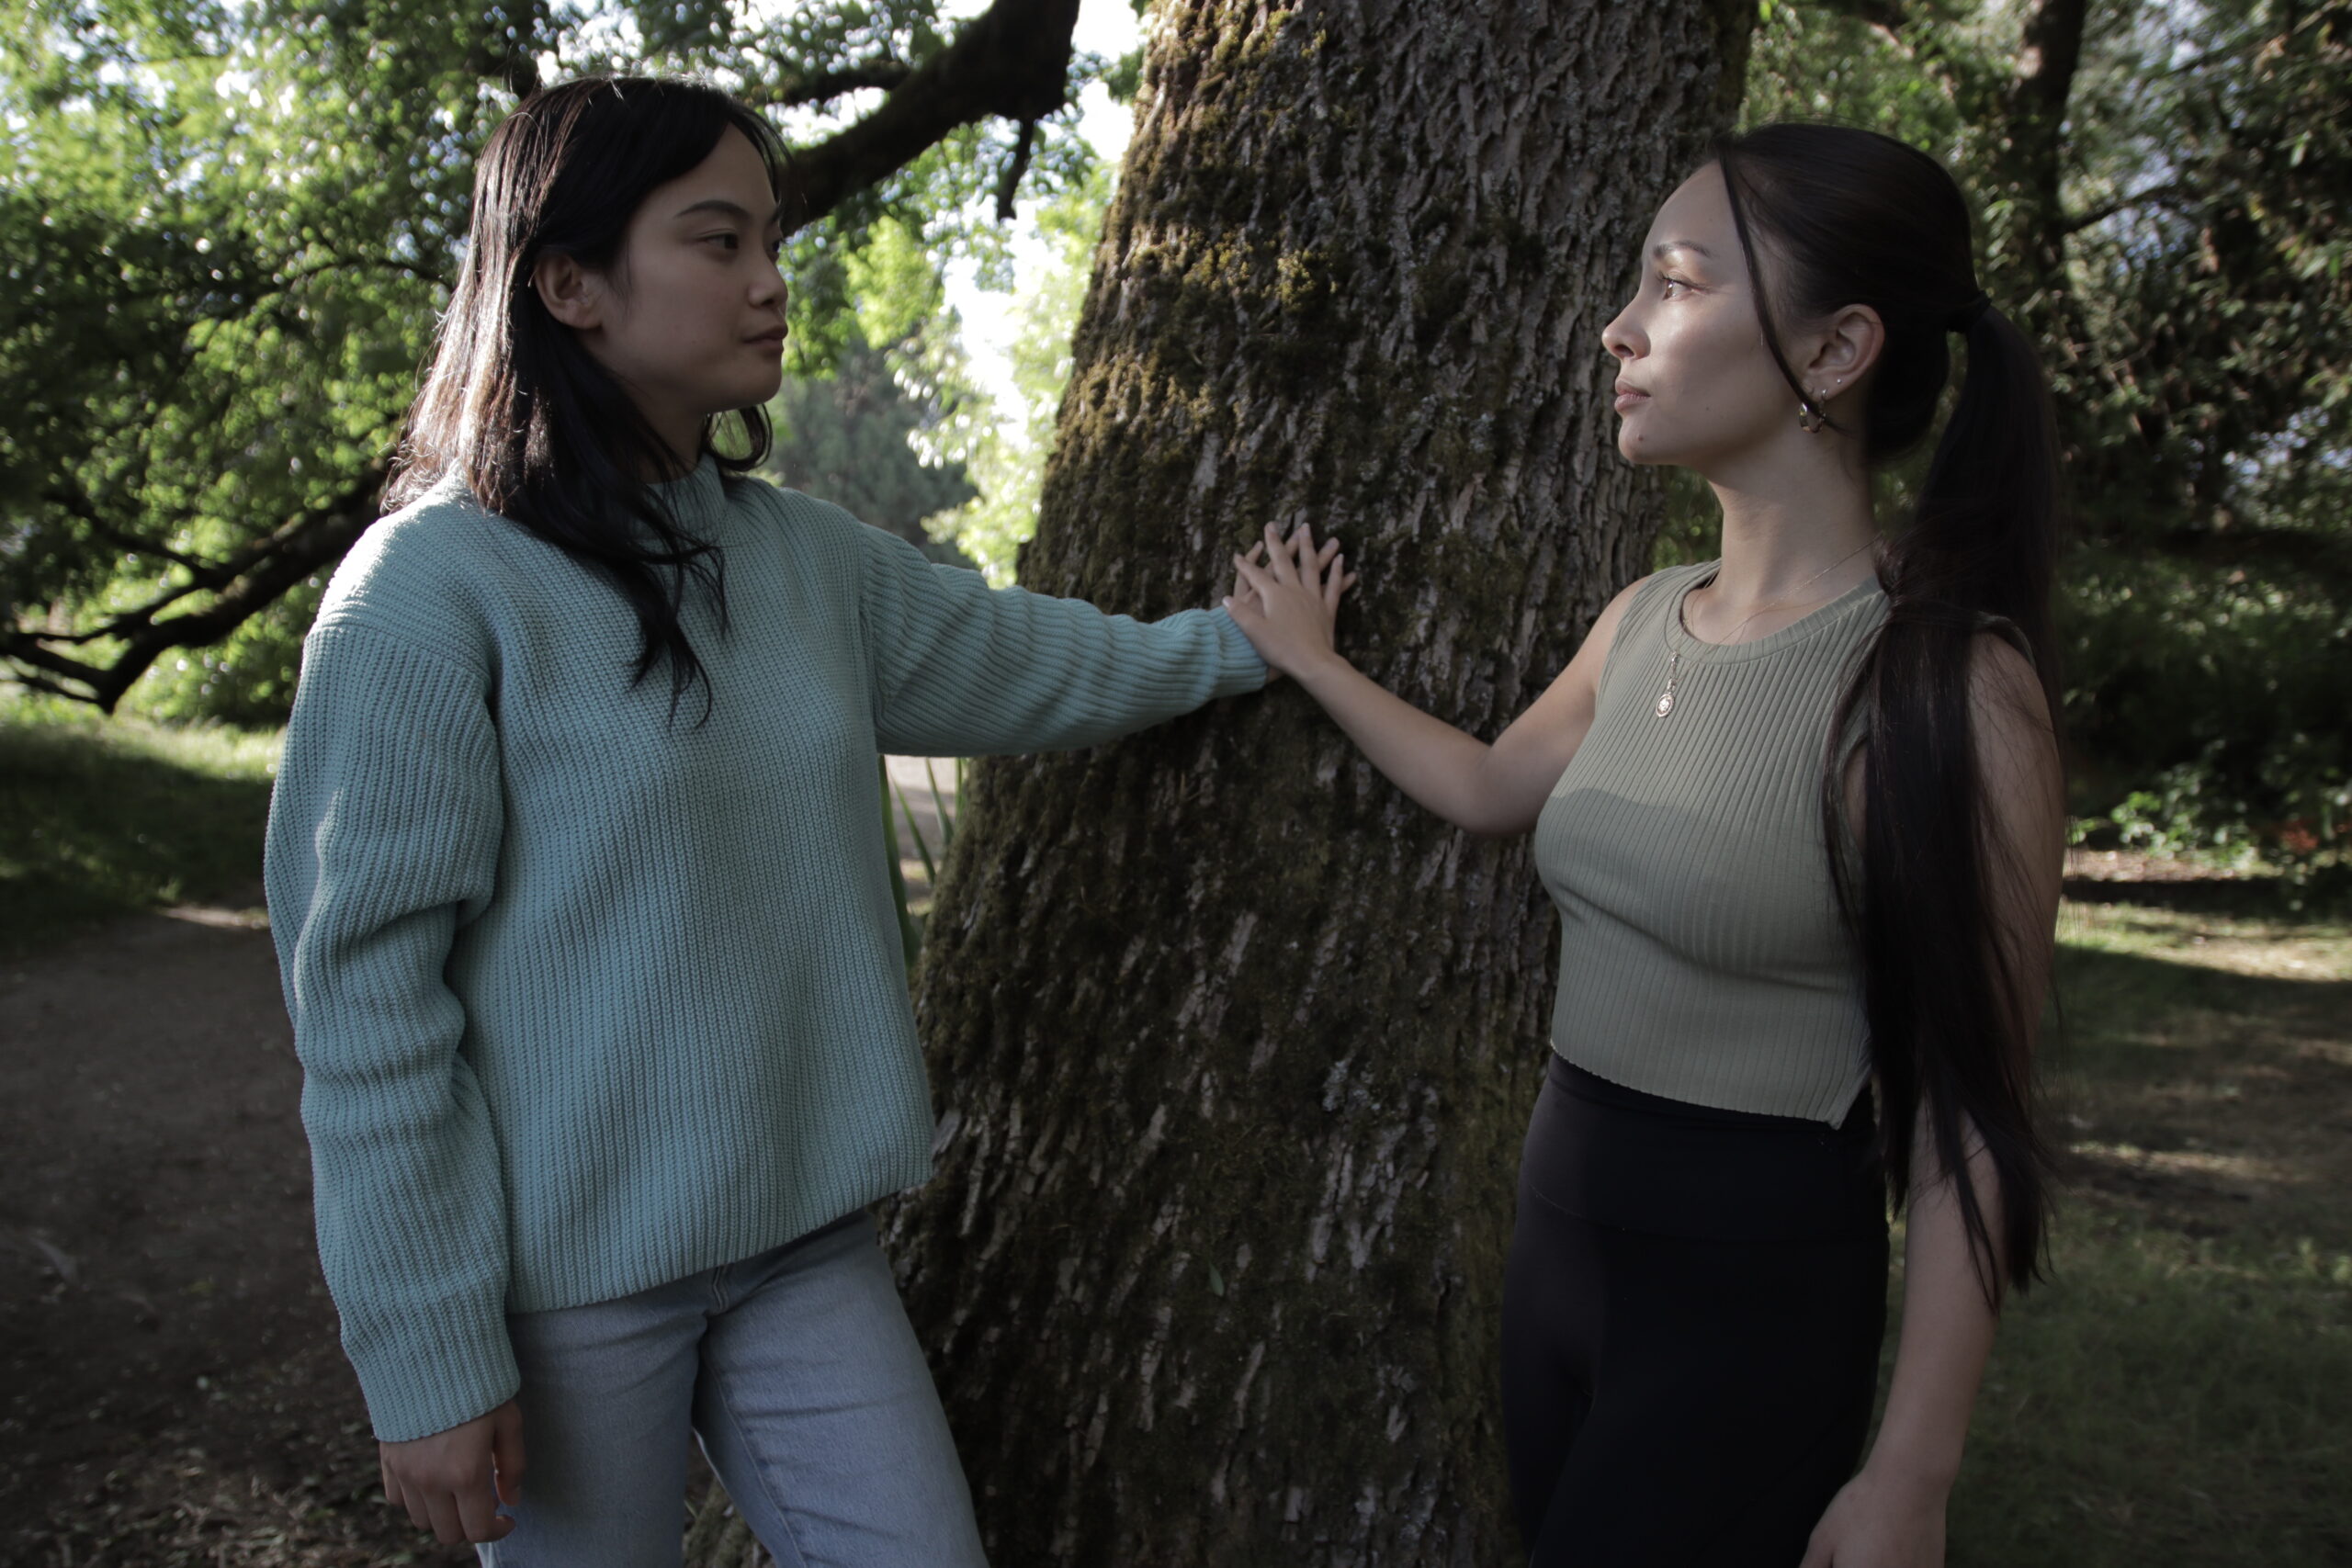 Two Asian women look at each other with their hands touching on a tree branch between them. They’re both wearing neutral colored shirts and they’re in a forest surrounded by trees.